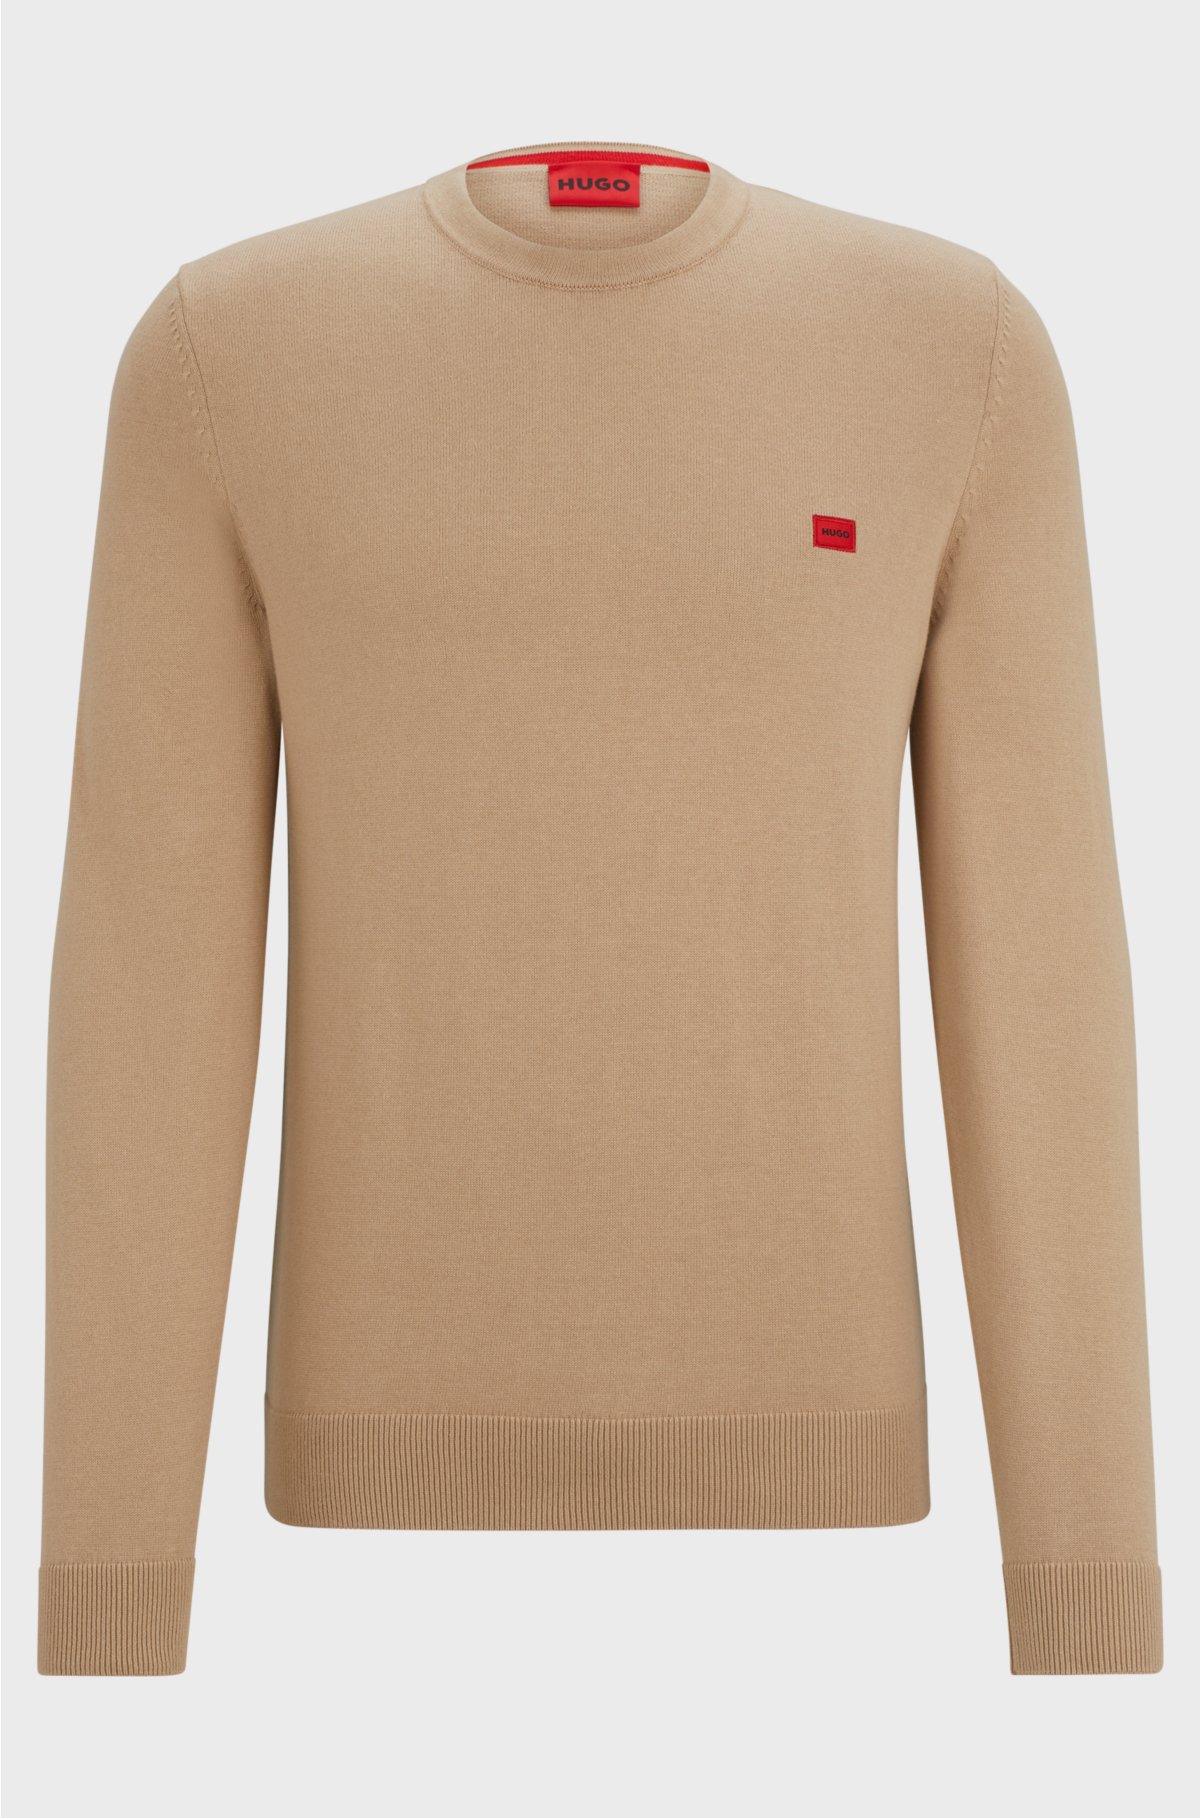 Knitted cotton sweater with red logo label, Beige